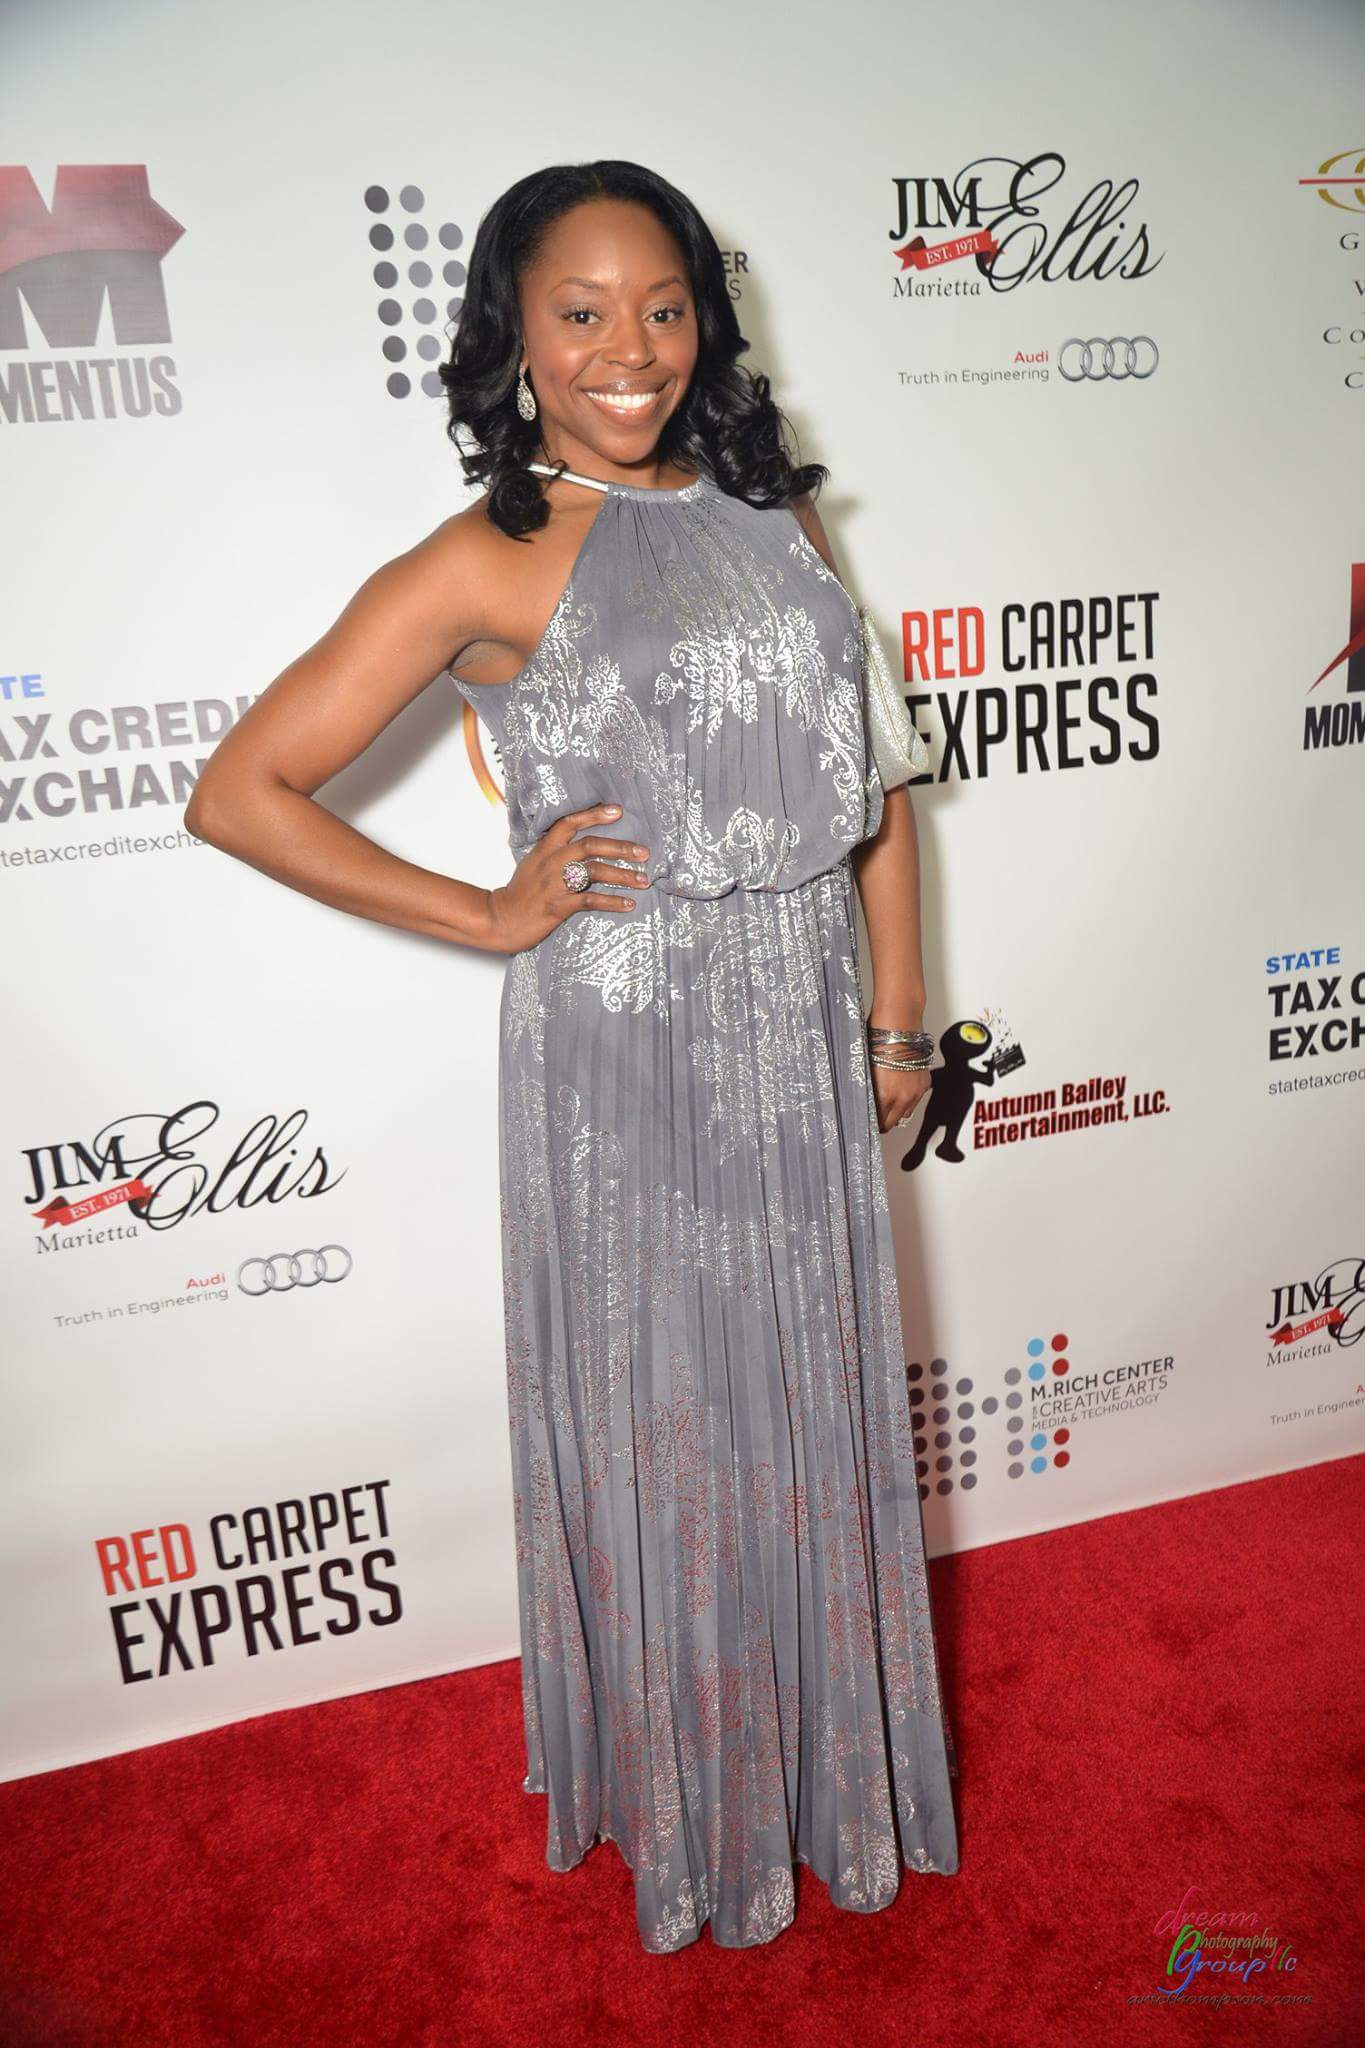 Actor Anisa Nyell Johnson on the red carpet at the 2015 Georgia Entertainment Gala